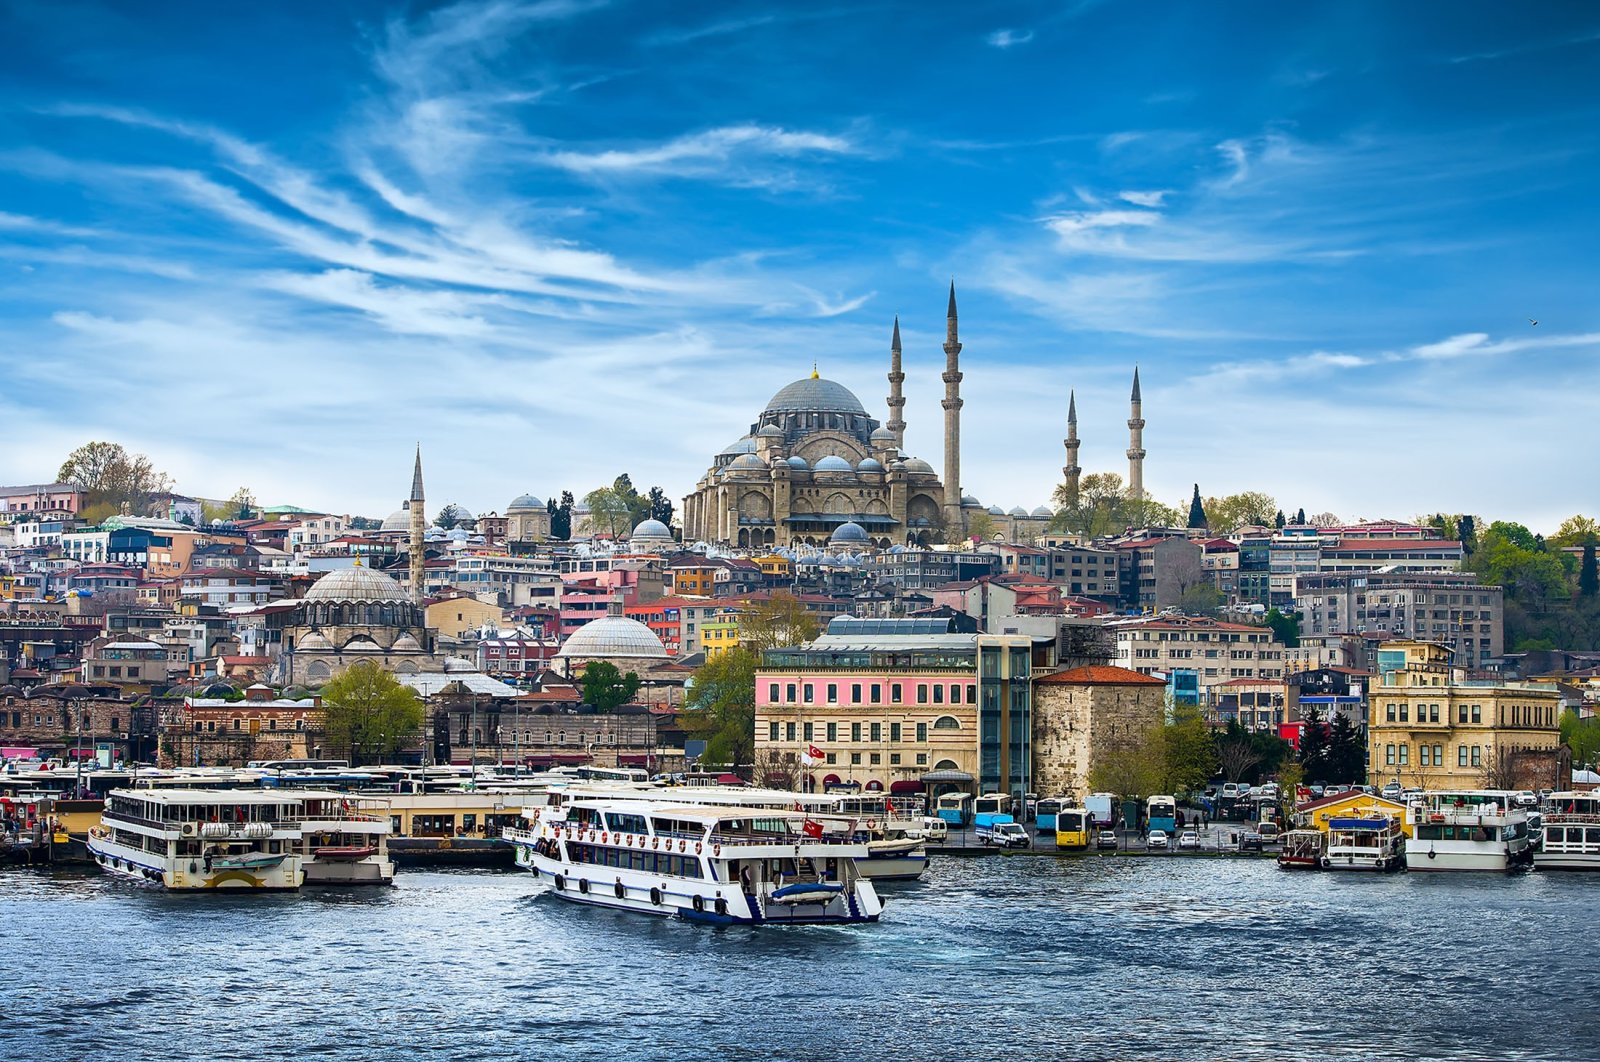 Turkey’s culture capital of Istanbul is nothing to scoff at. (Shutterstock Photo)